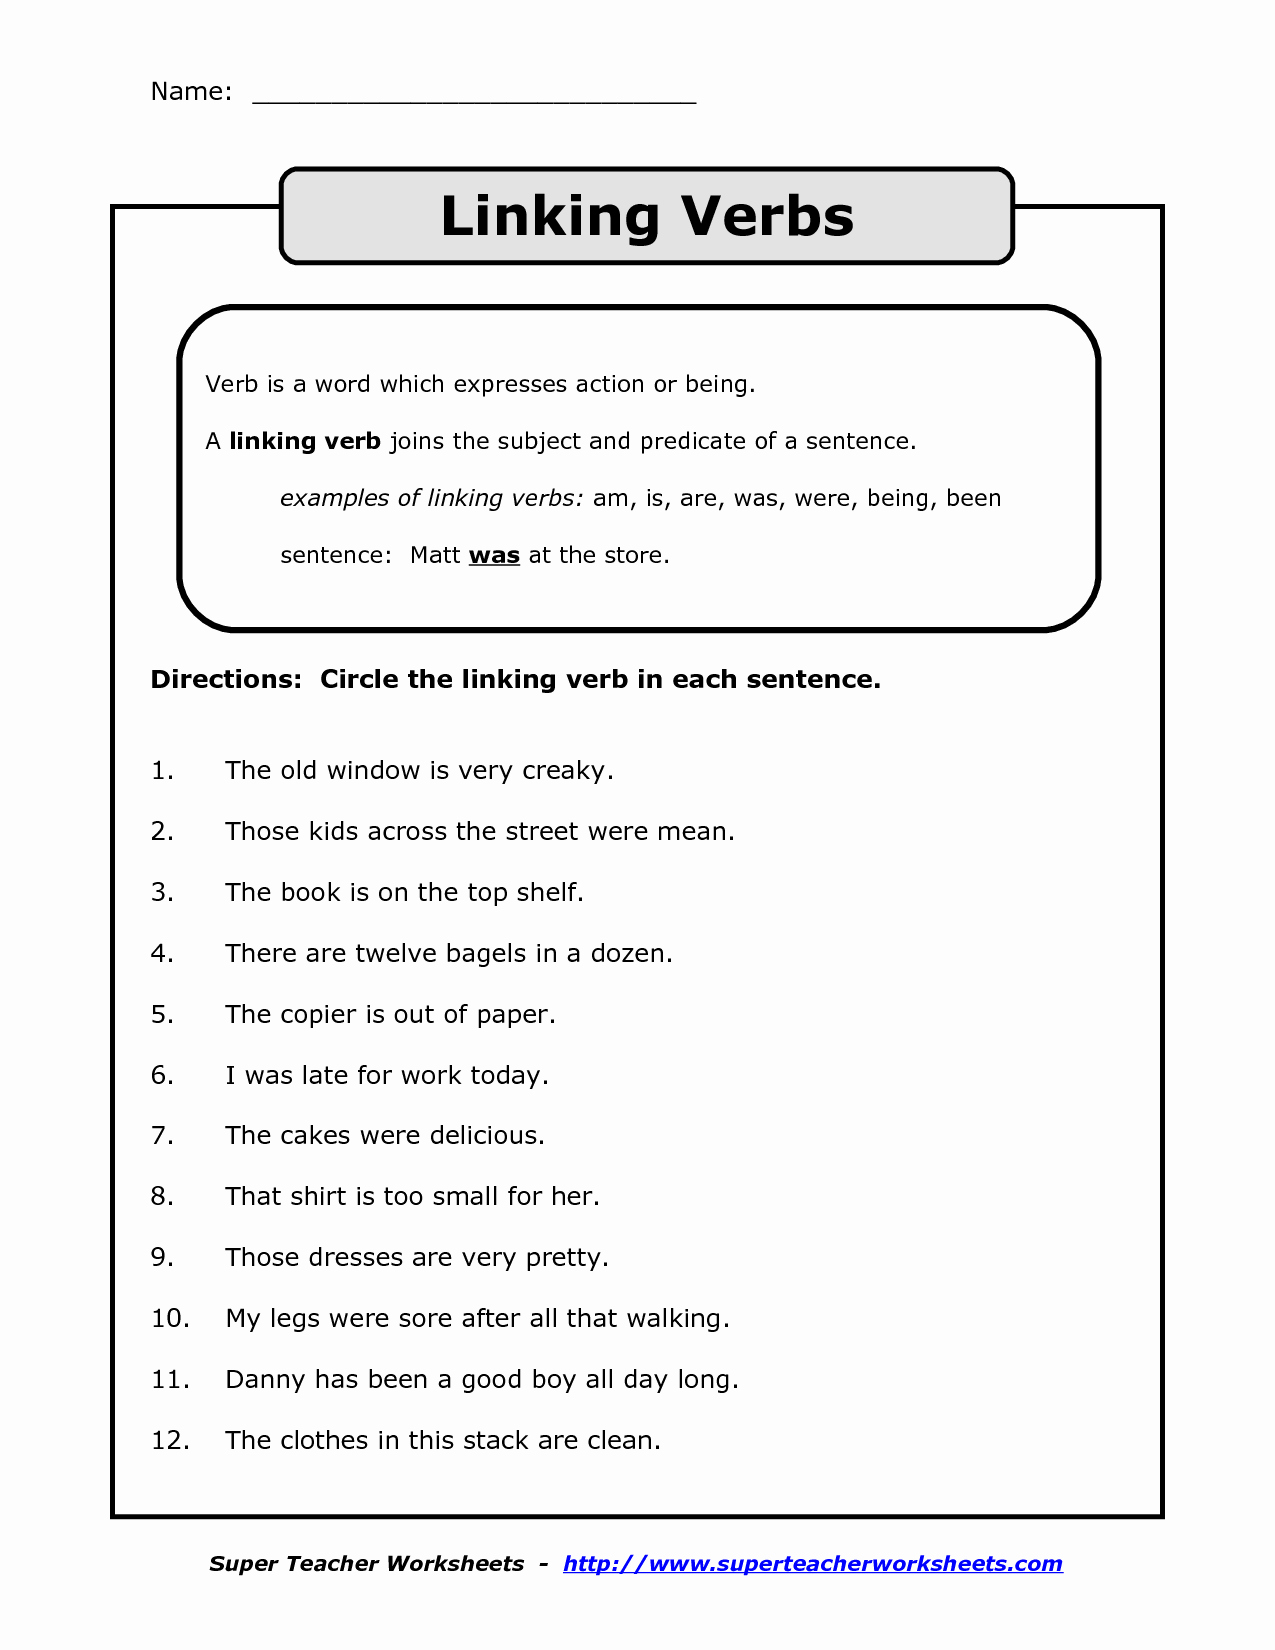 Action and Linking Verbs Worksheet Luxury 16 Best Action Verb Linking Verb Worksheet